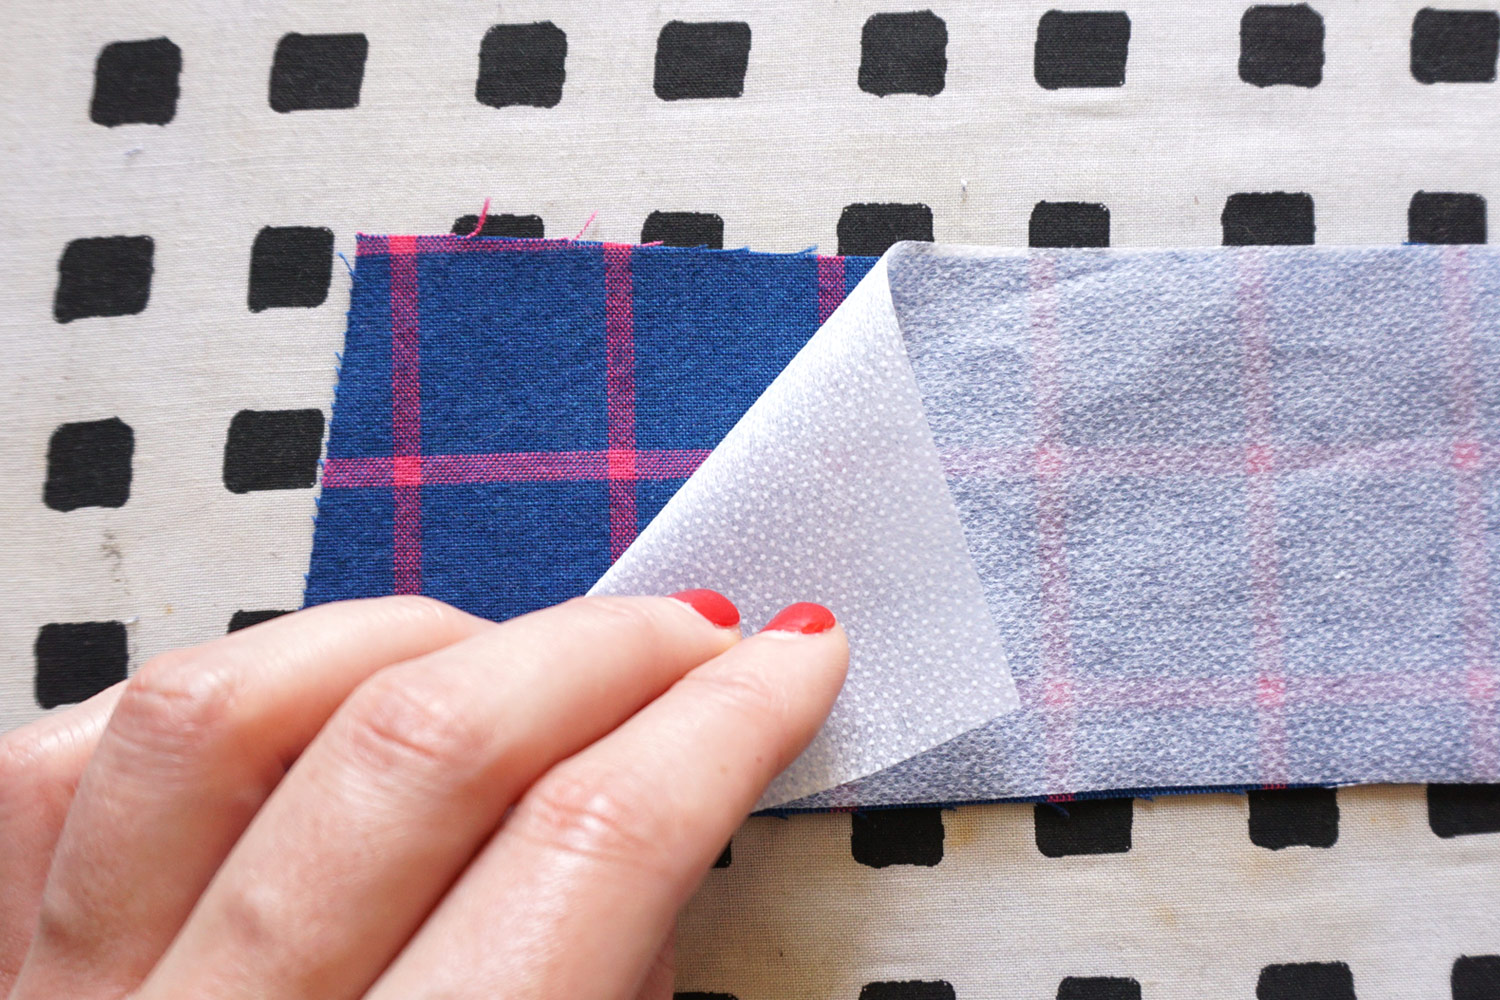 Steam or no Steam? How to apply fusible interfacing that won't peel off. 